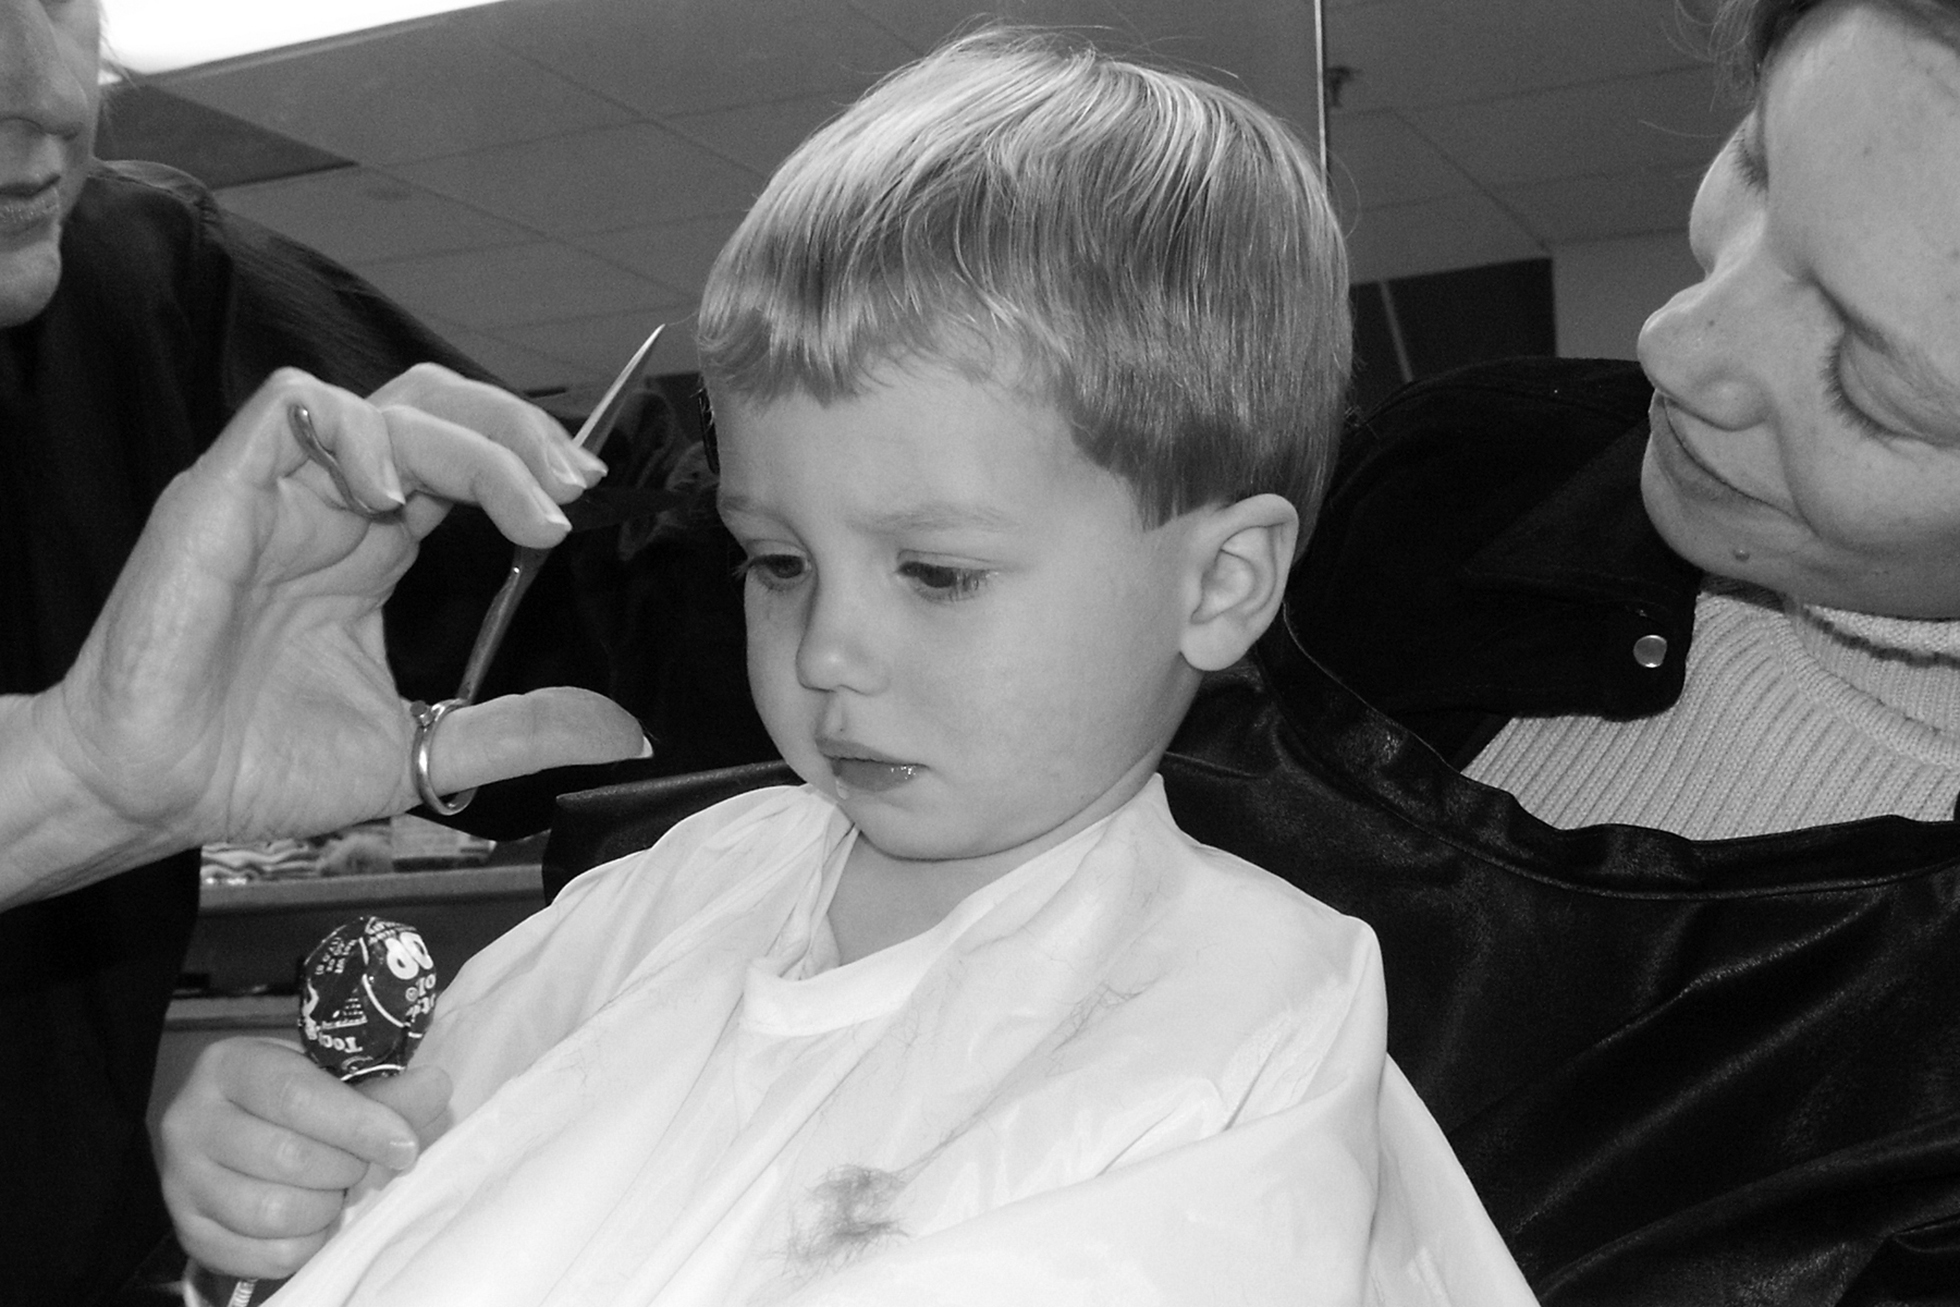 A small boy in a white hair-salon cape is sitting on a woman’s lap while getting a haircut. The boy is looking down at the Tootsie Pop in his hand.